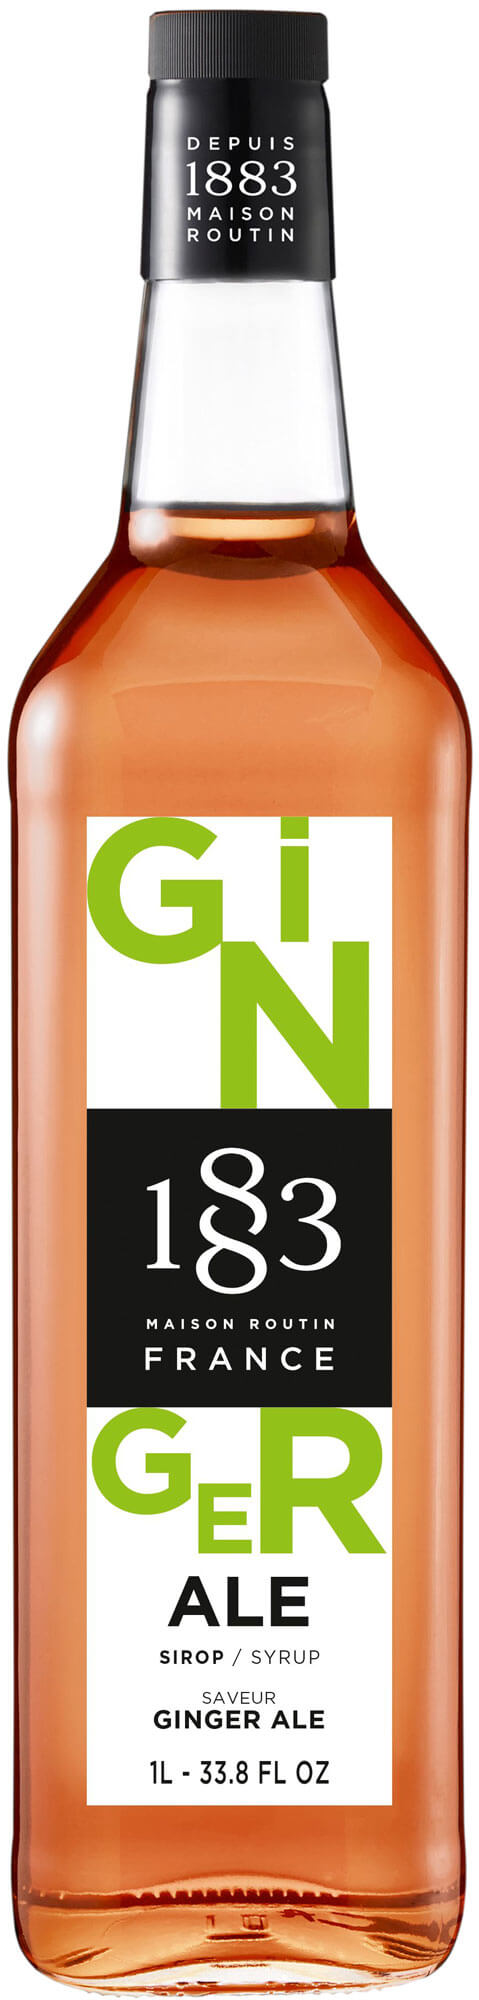 Ginger Ale - Maison Routin 1883 syrup (1,0l)